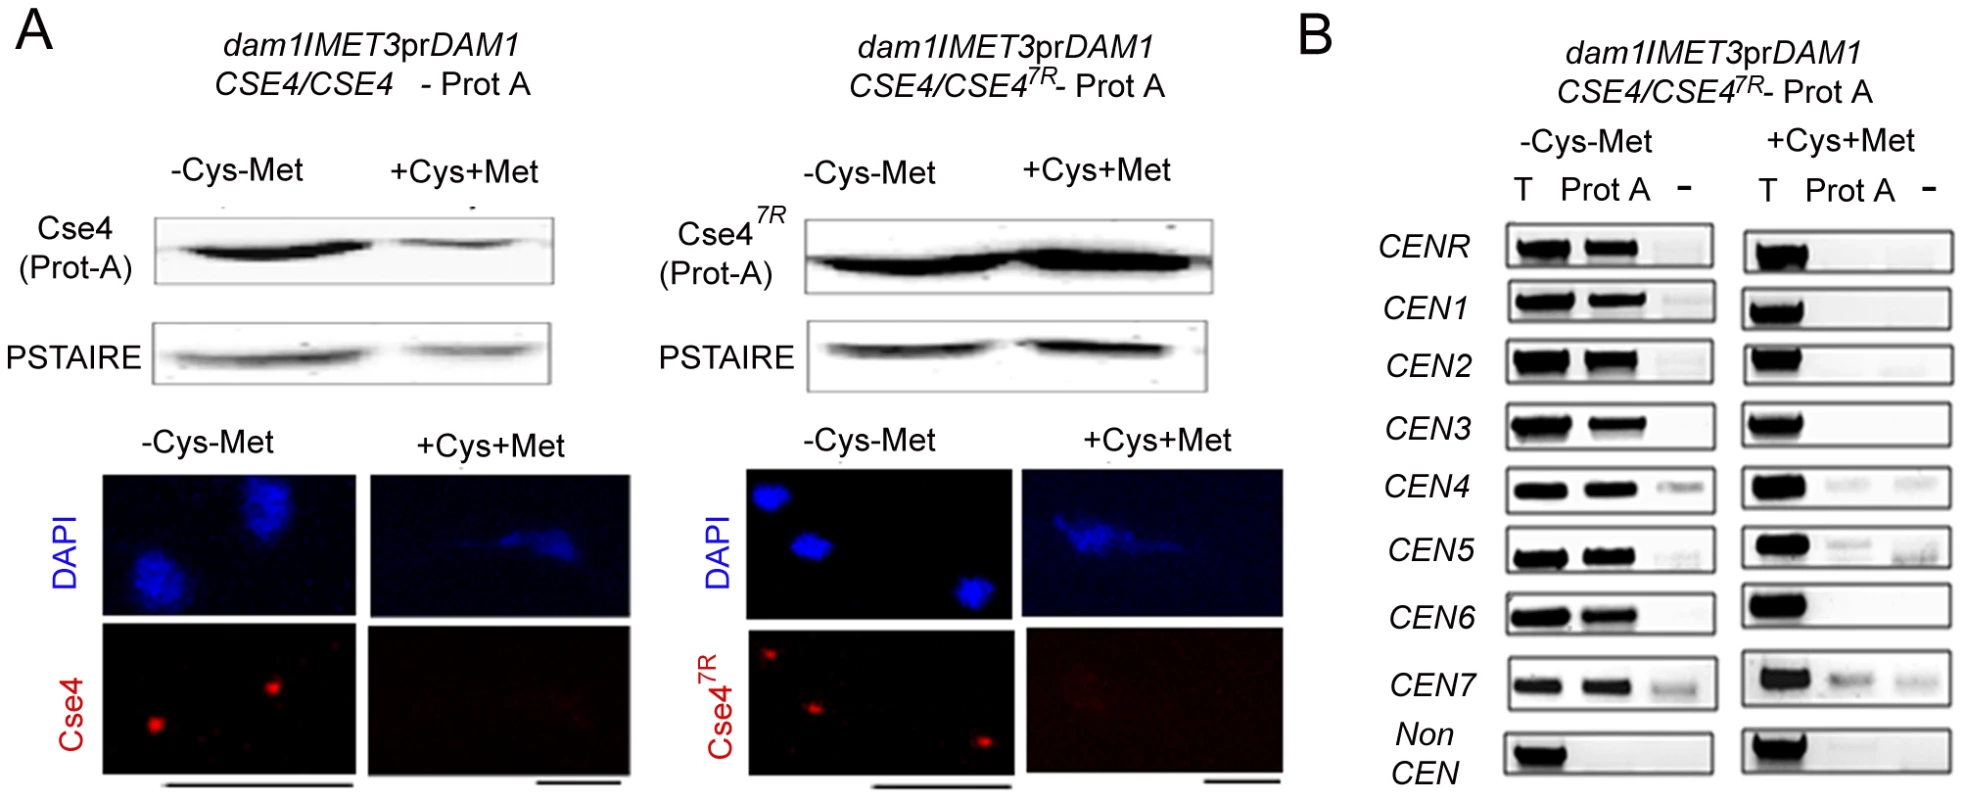 Depletion of Dam1 leads to degradation of CENP-A/Cse4 through the ubiquitin-mediated proteasomal degradation pathway.